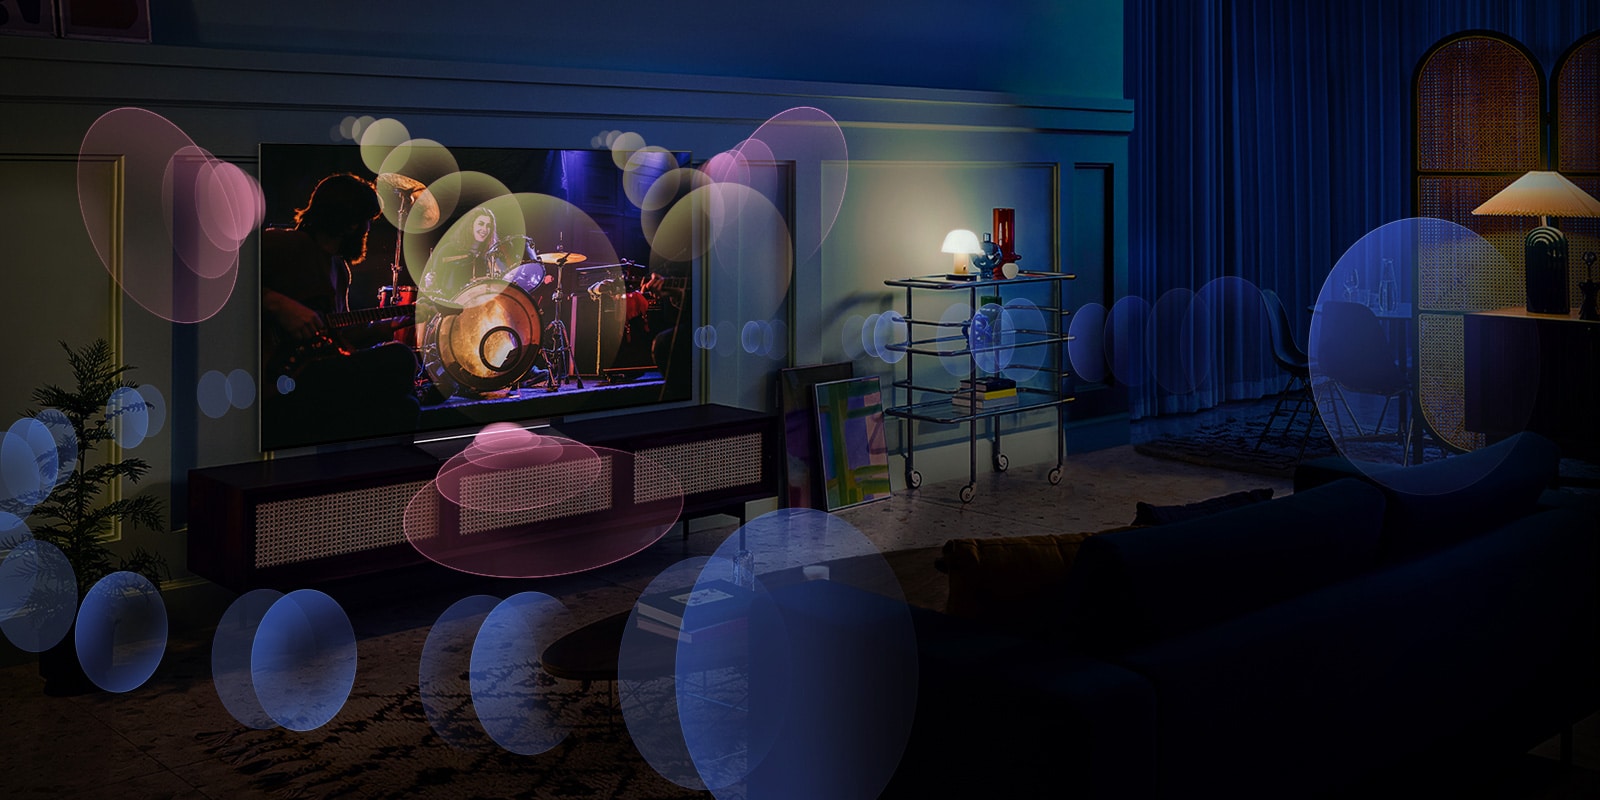 An image of an LG OLED TV in a blue, dimly lit room showing a music concert. Bubbles depicting virtual surround sound fill the space.